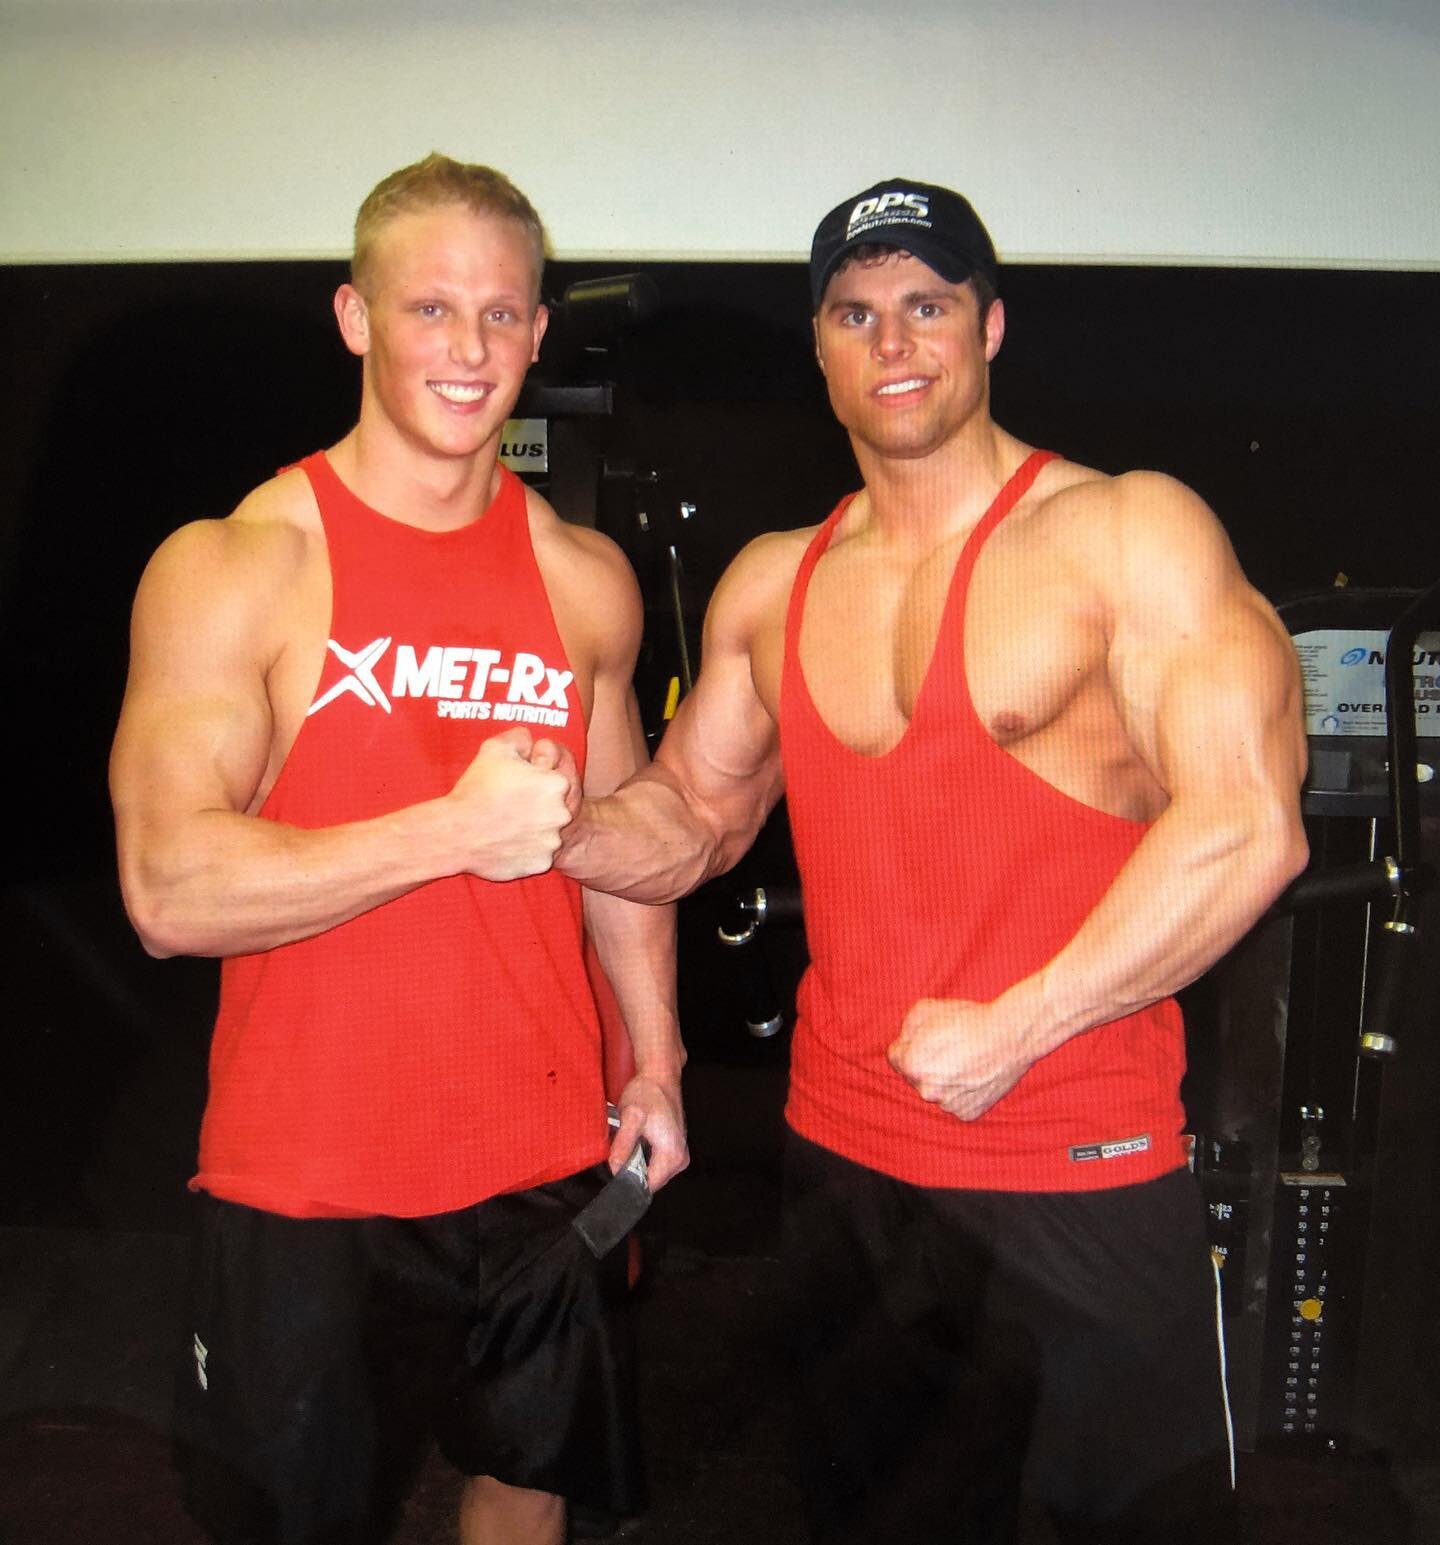 Throwing it back to over a decade ago with @j_janov and our last college workout together in 2009. Jason sent a few pictures to me last week and we had a good laugh at those baby faces. I also think this photo is a great opportunity to visually show 